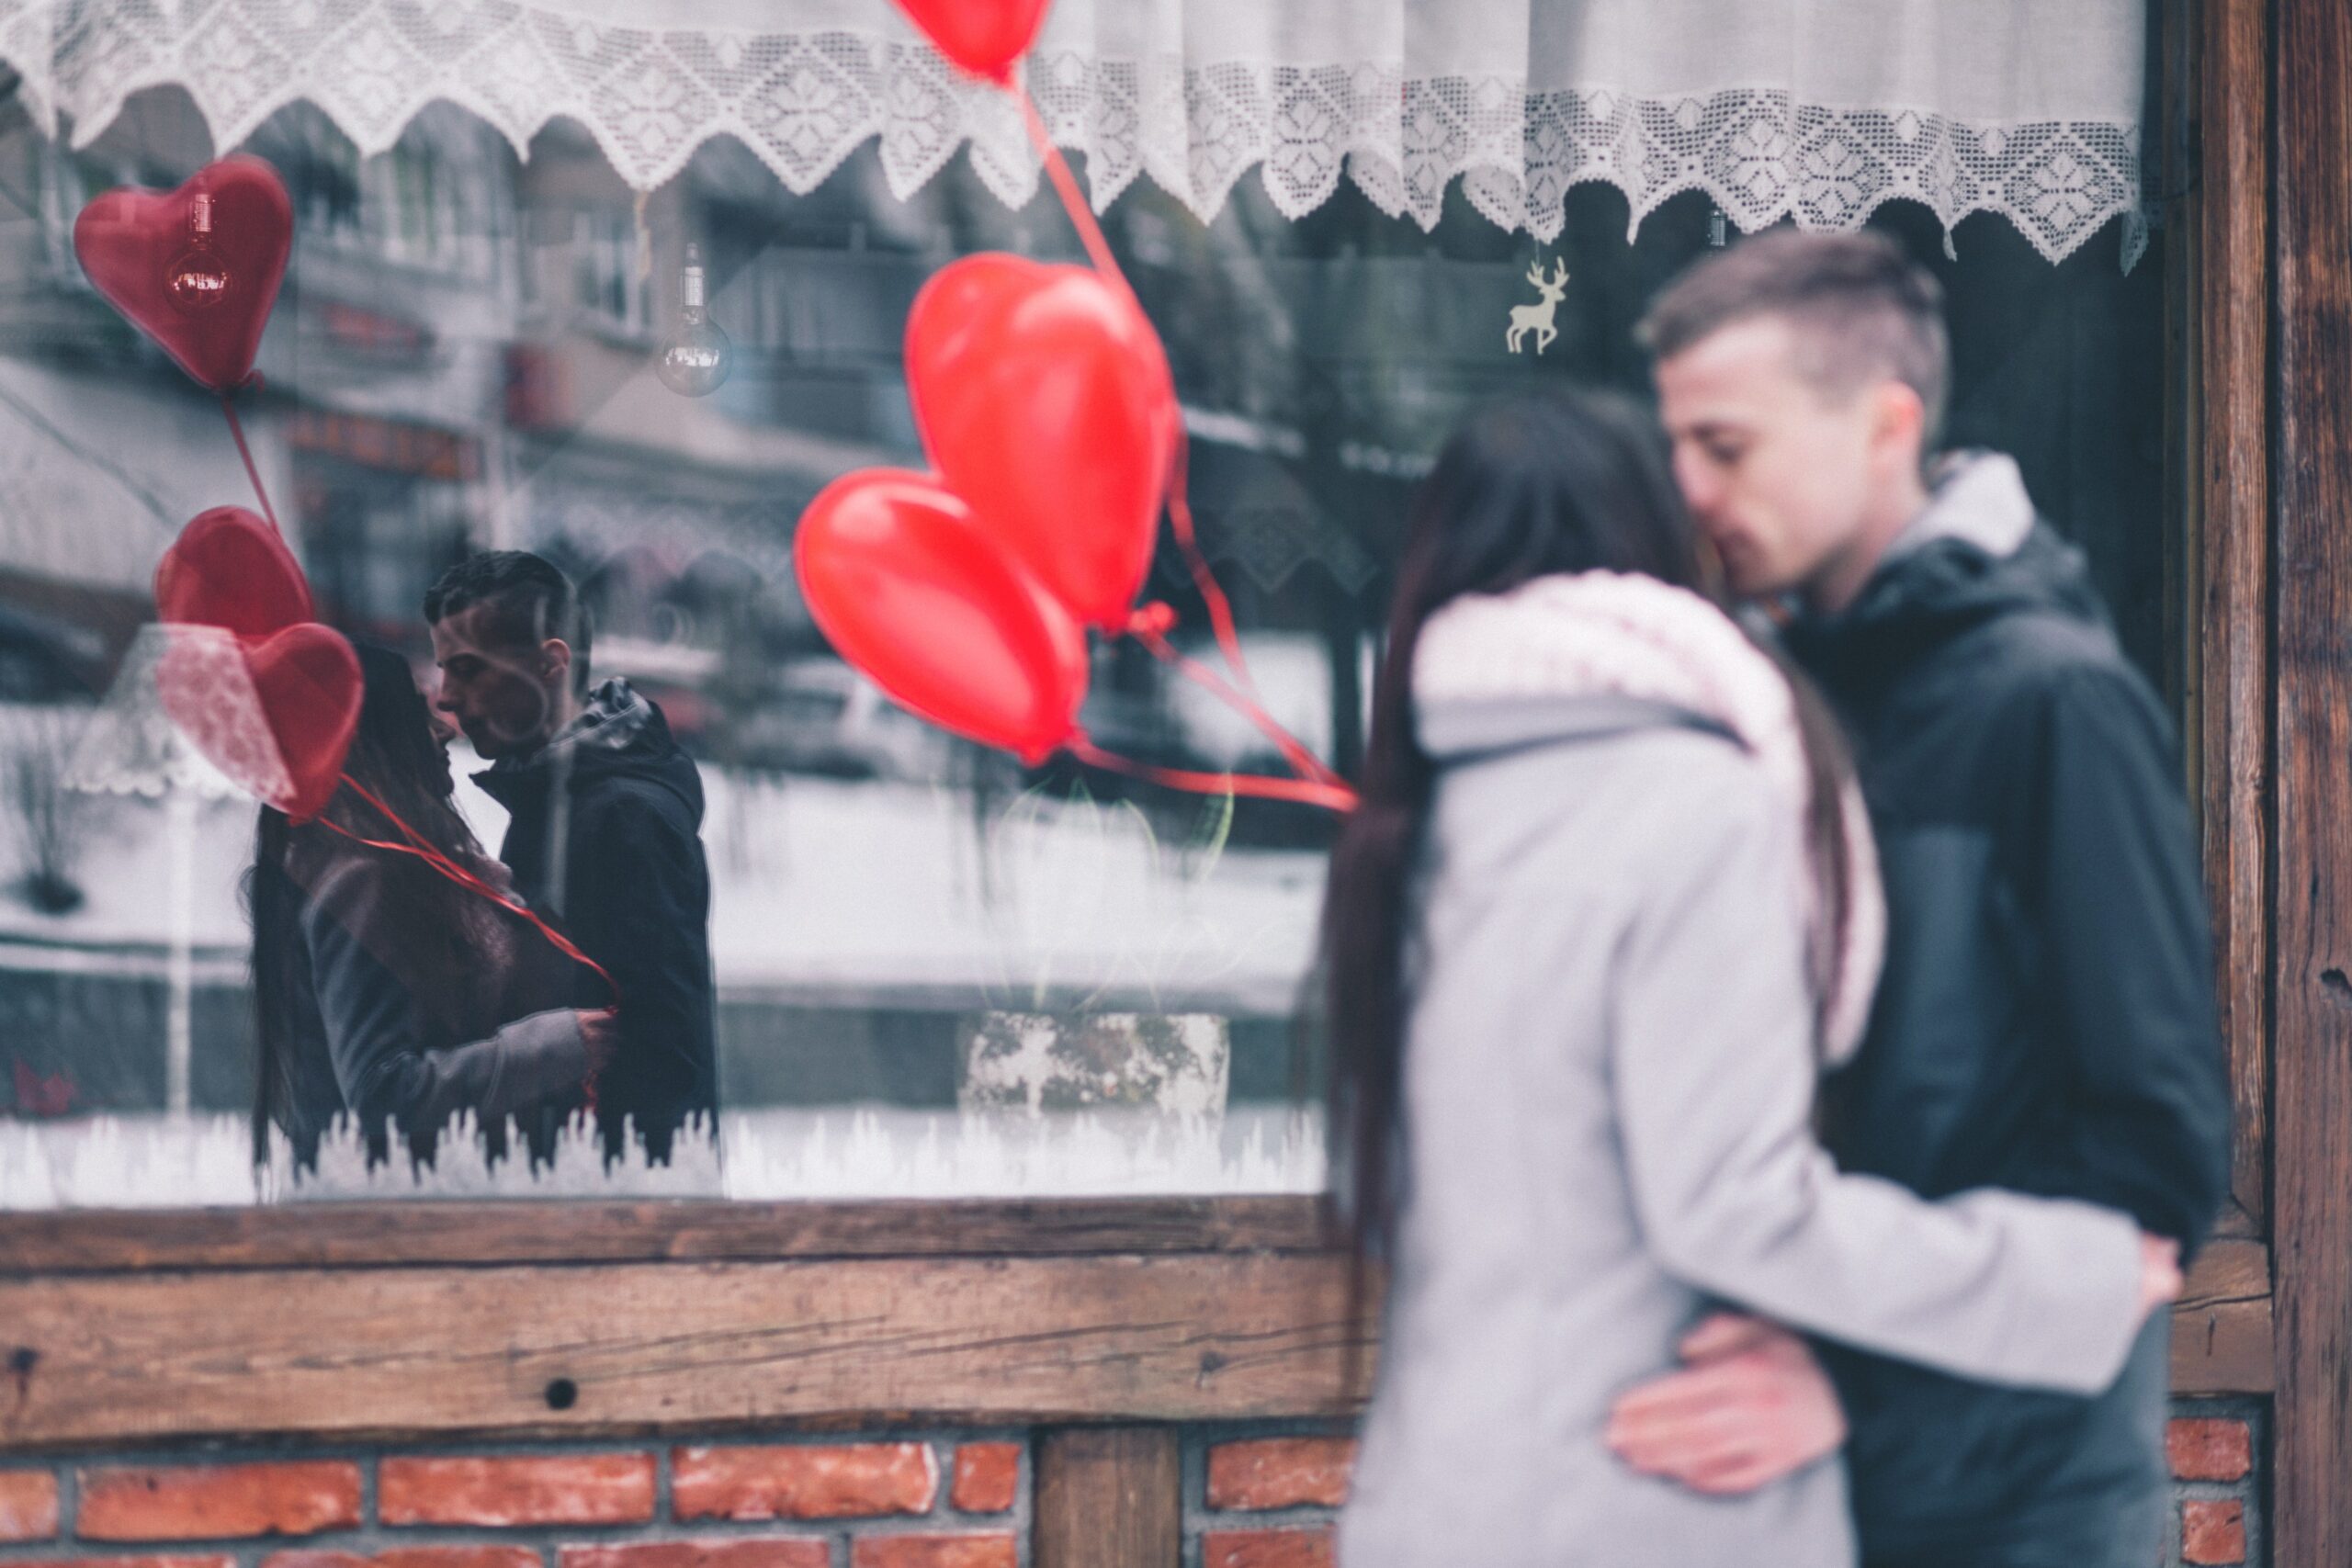 Photo of couple kissing with reflection on window pane. They are holding 3 heart shaped balloons.